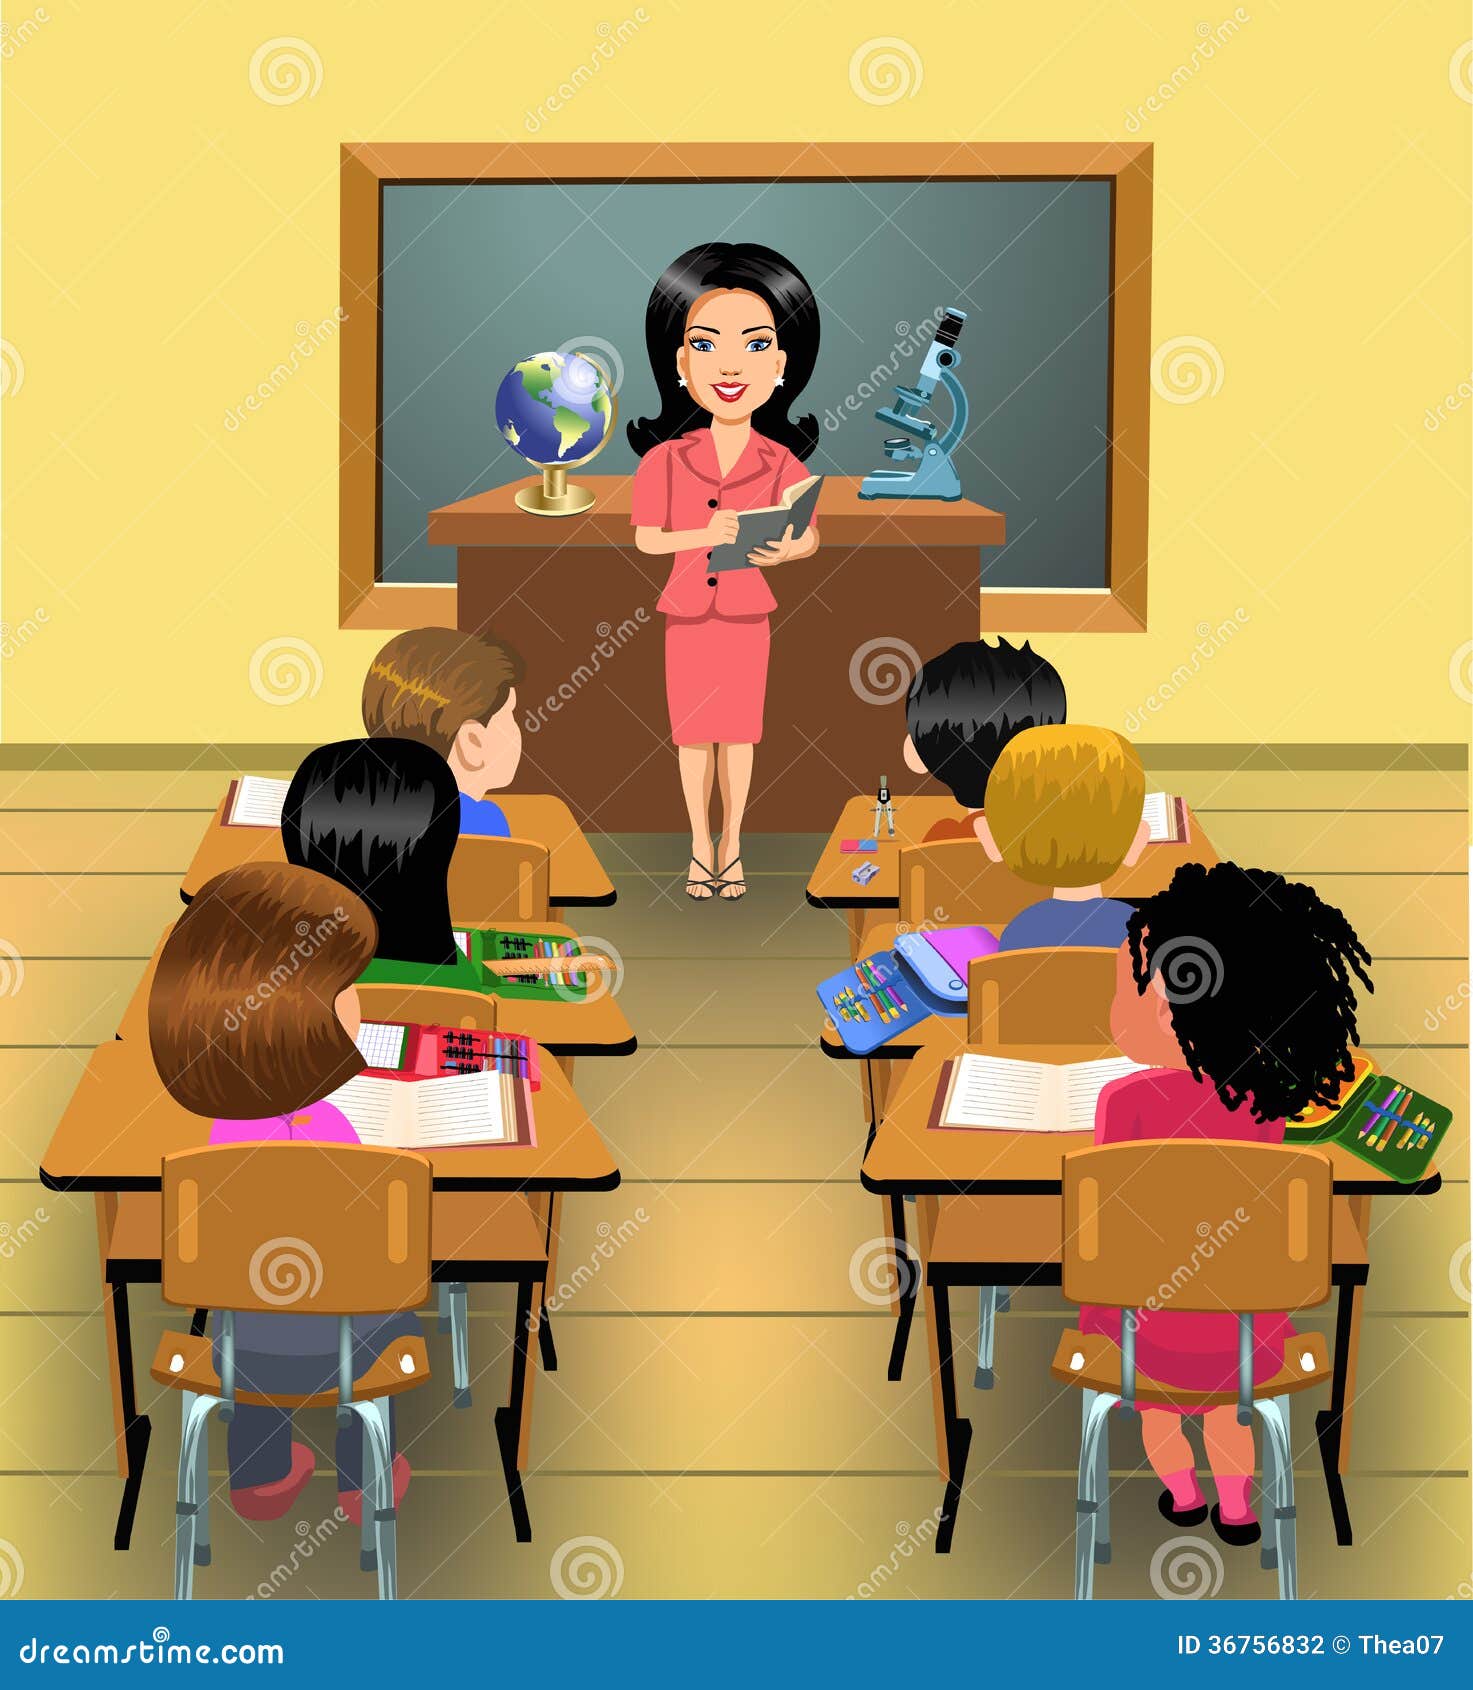 clipart pupils in class - photo #27